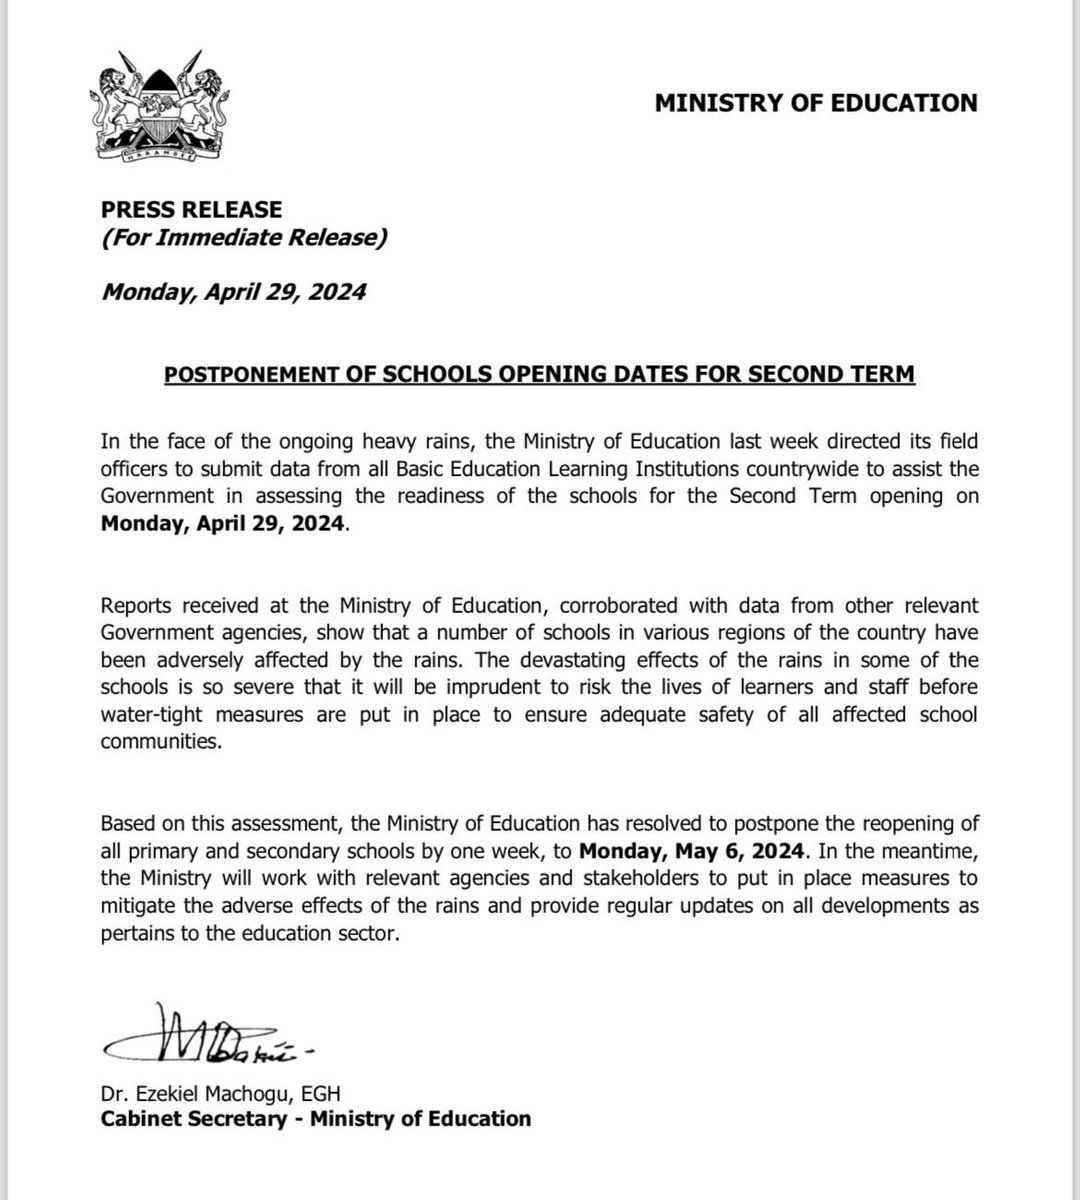 The Government has postponed re-opening of primary and secondary schools for 2nd term by one week from April 29 to May 6 following ongoing heavy rains, CS Machogu says.